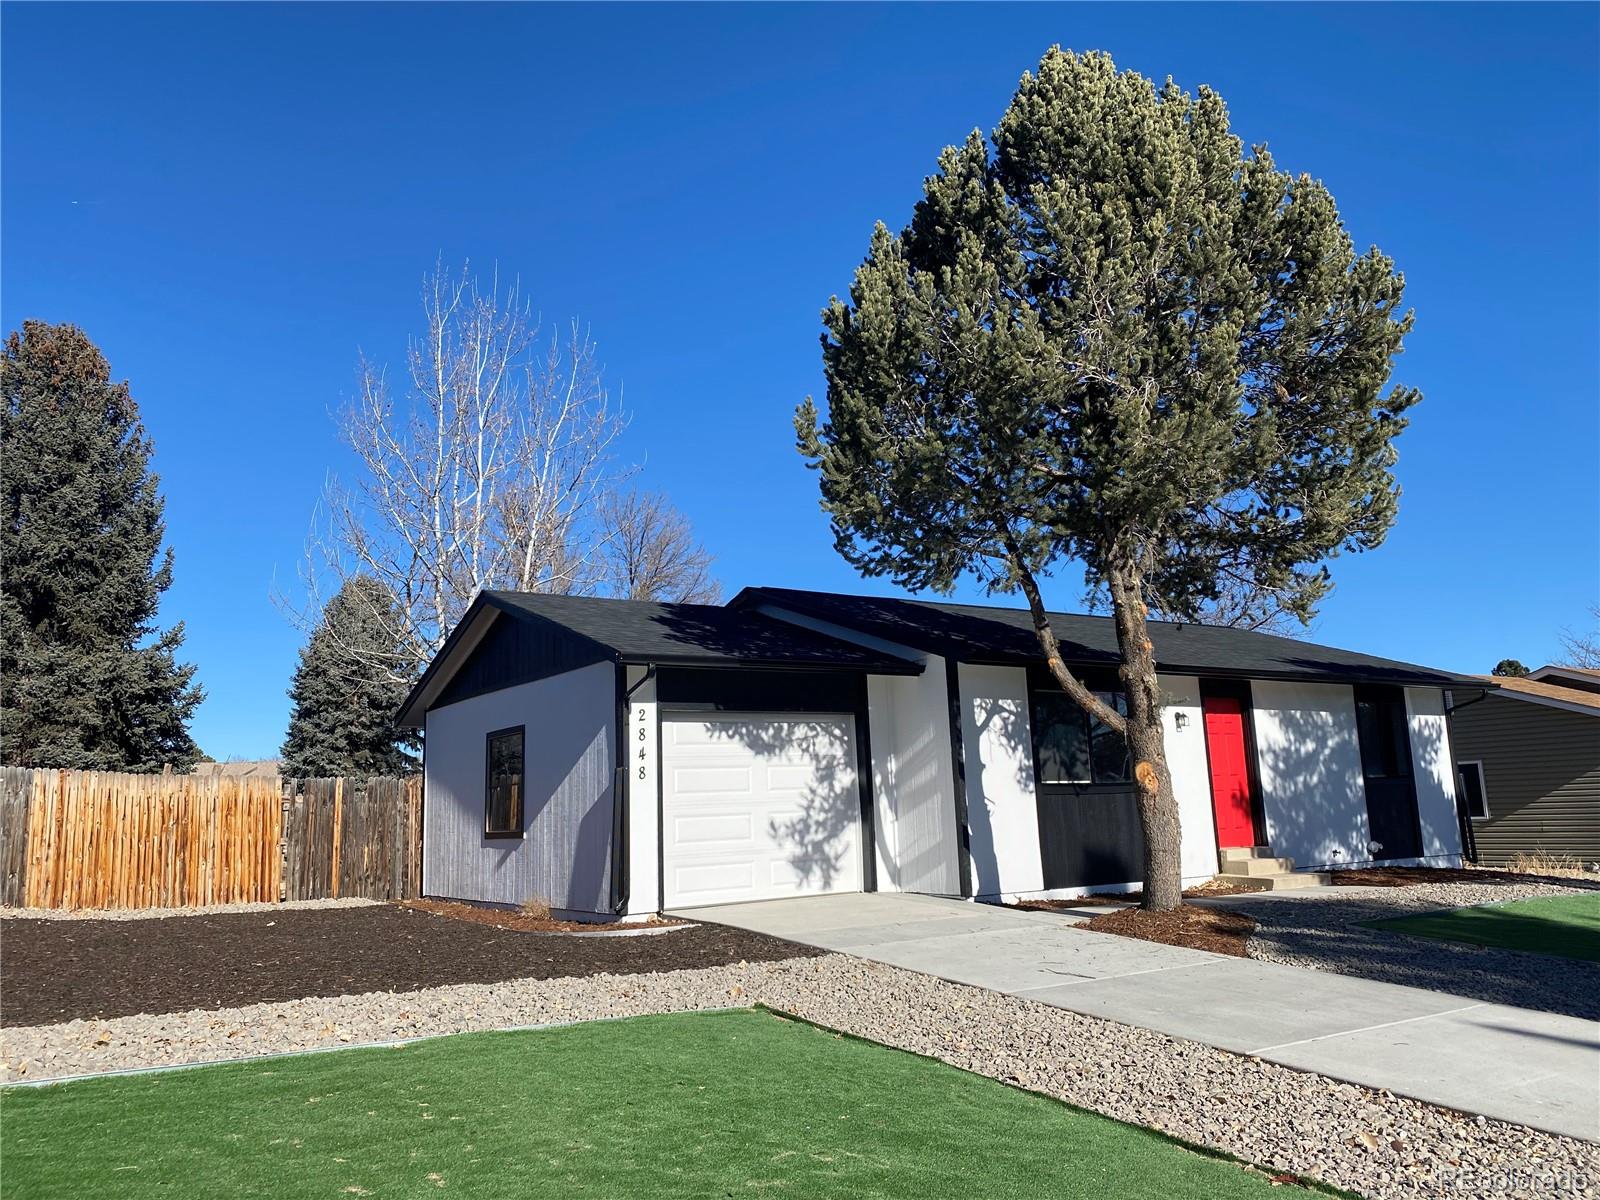 2848 W 134th Place, broomfield MLS: 3314725 Beds: 2 Baths: 1 Price: $429,900